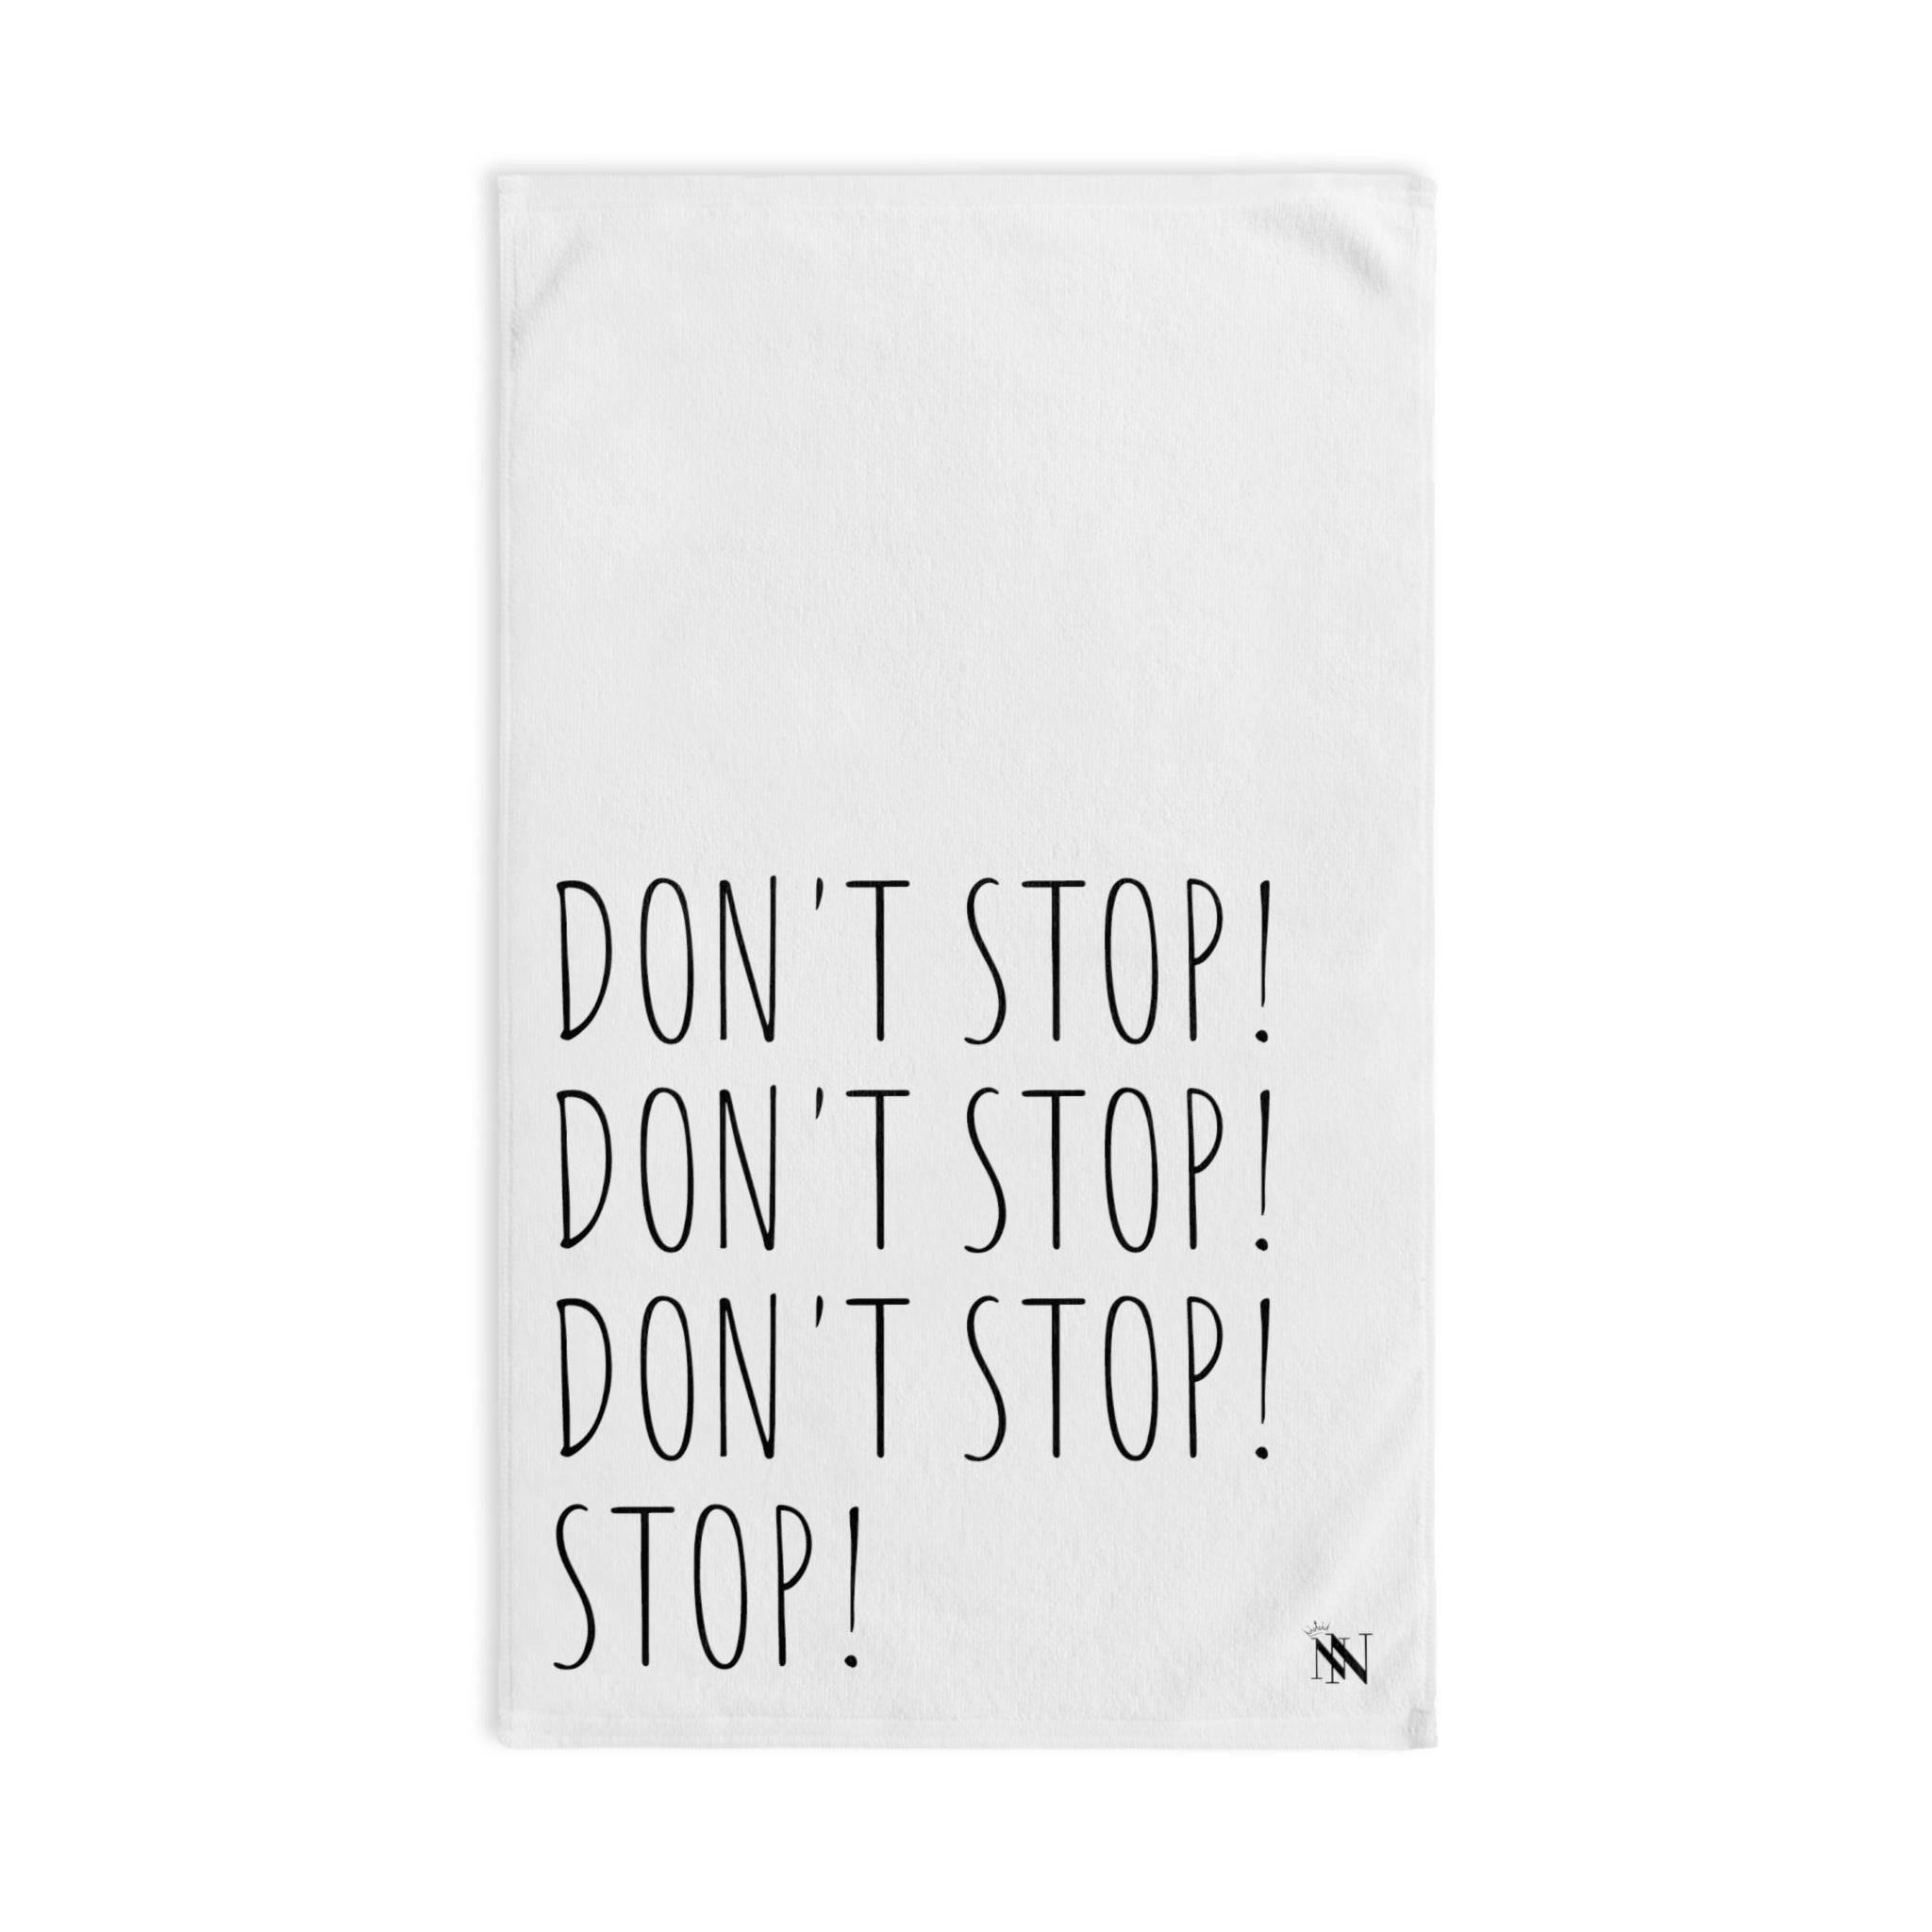 Don't Stop! White | Funny Gifts for Men - Gifts for Him - Birthday Gifts for Men, Him, Her, Husband, Boyfriend, Girlfriend, New Couple Gifts, Fathers & Valentines Day Gifts, Christmas Gifts NECTAR NAPKINS